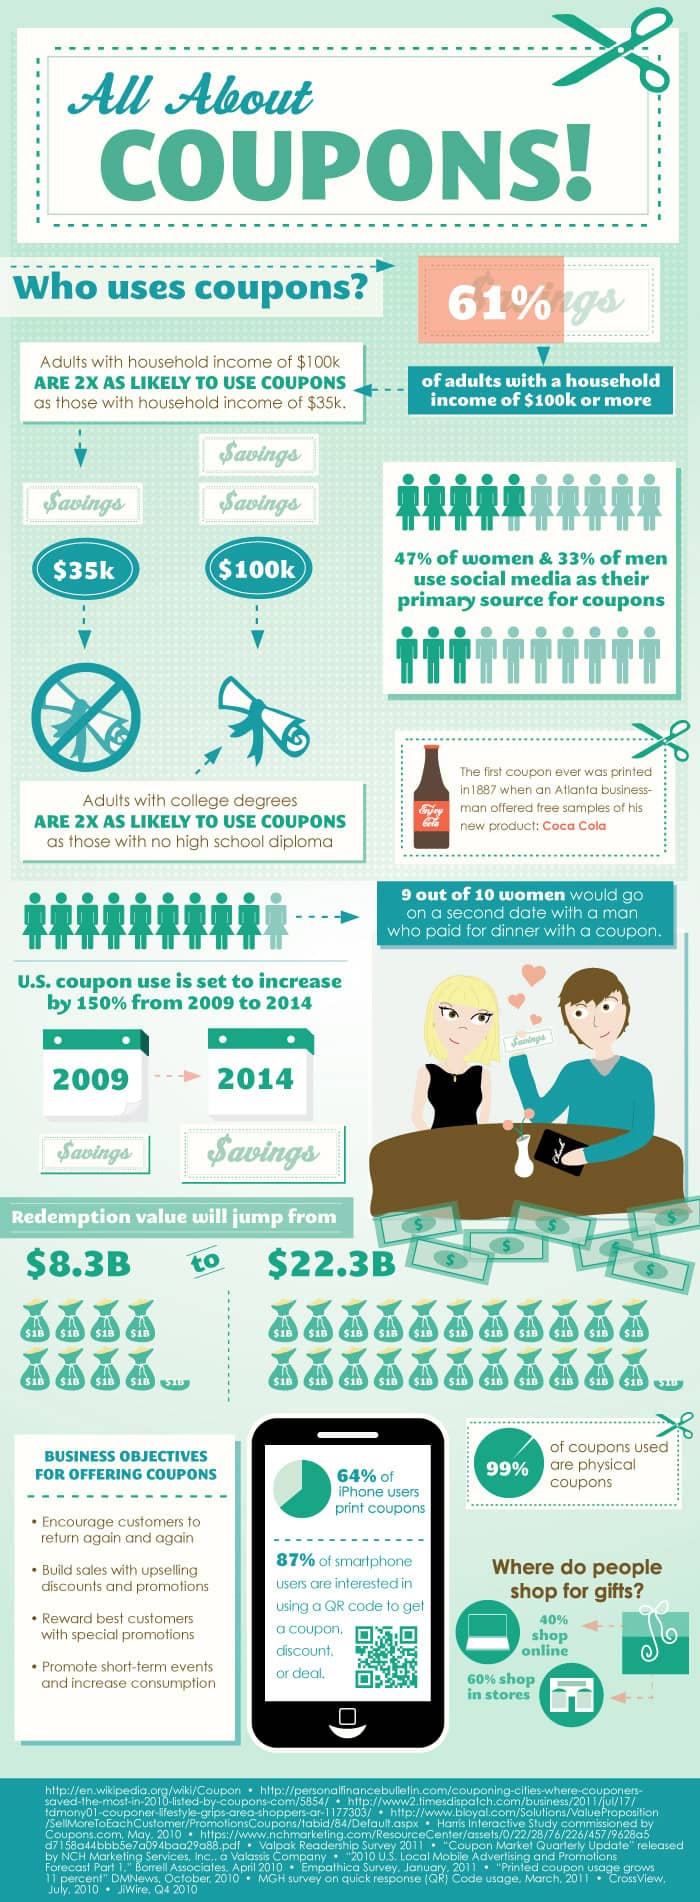 coupons-infographic